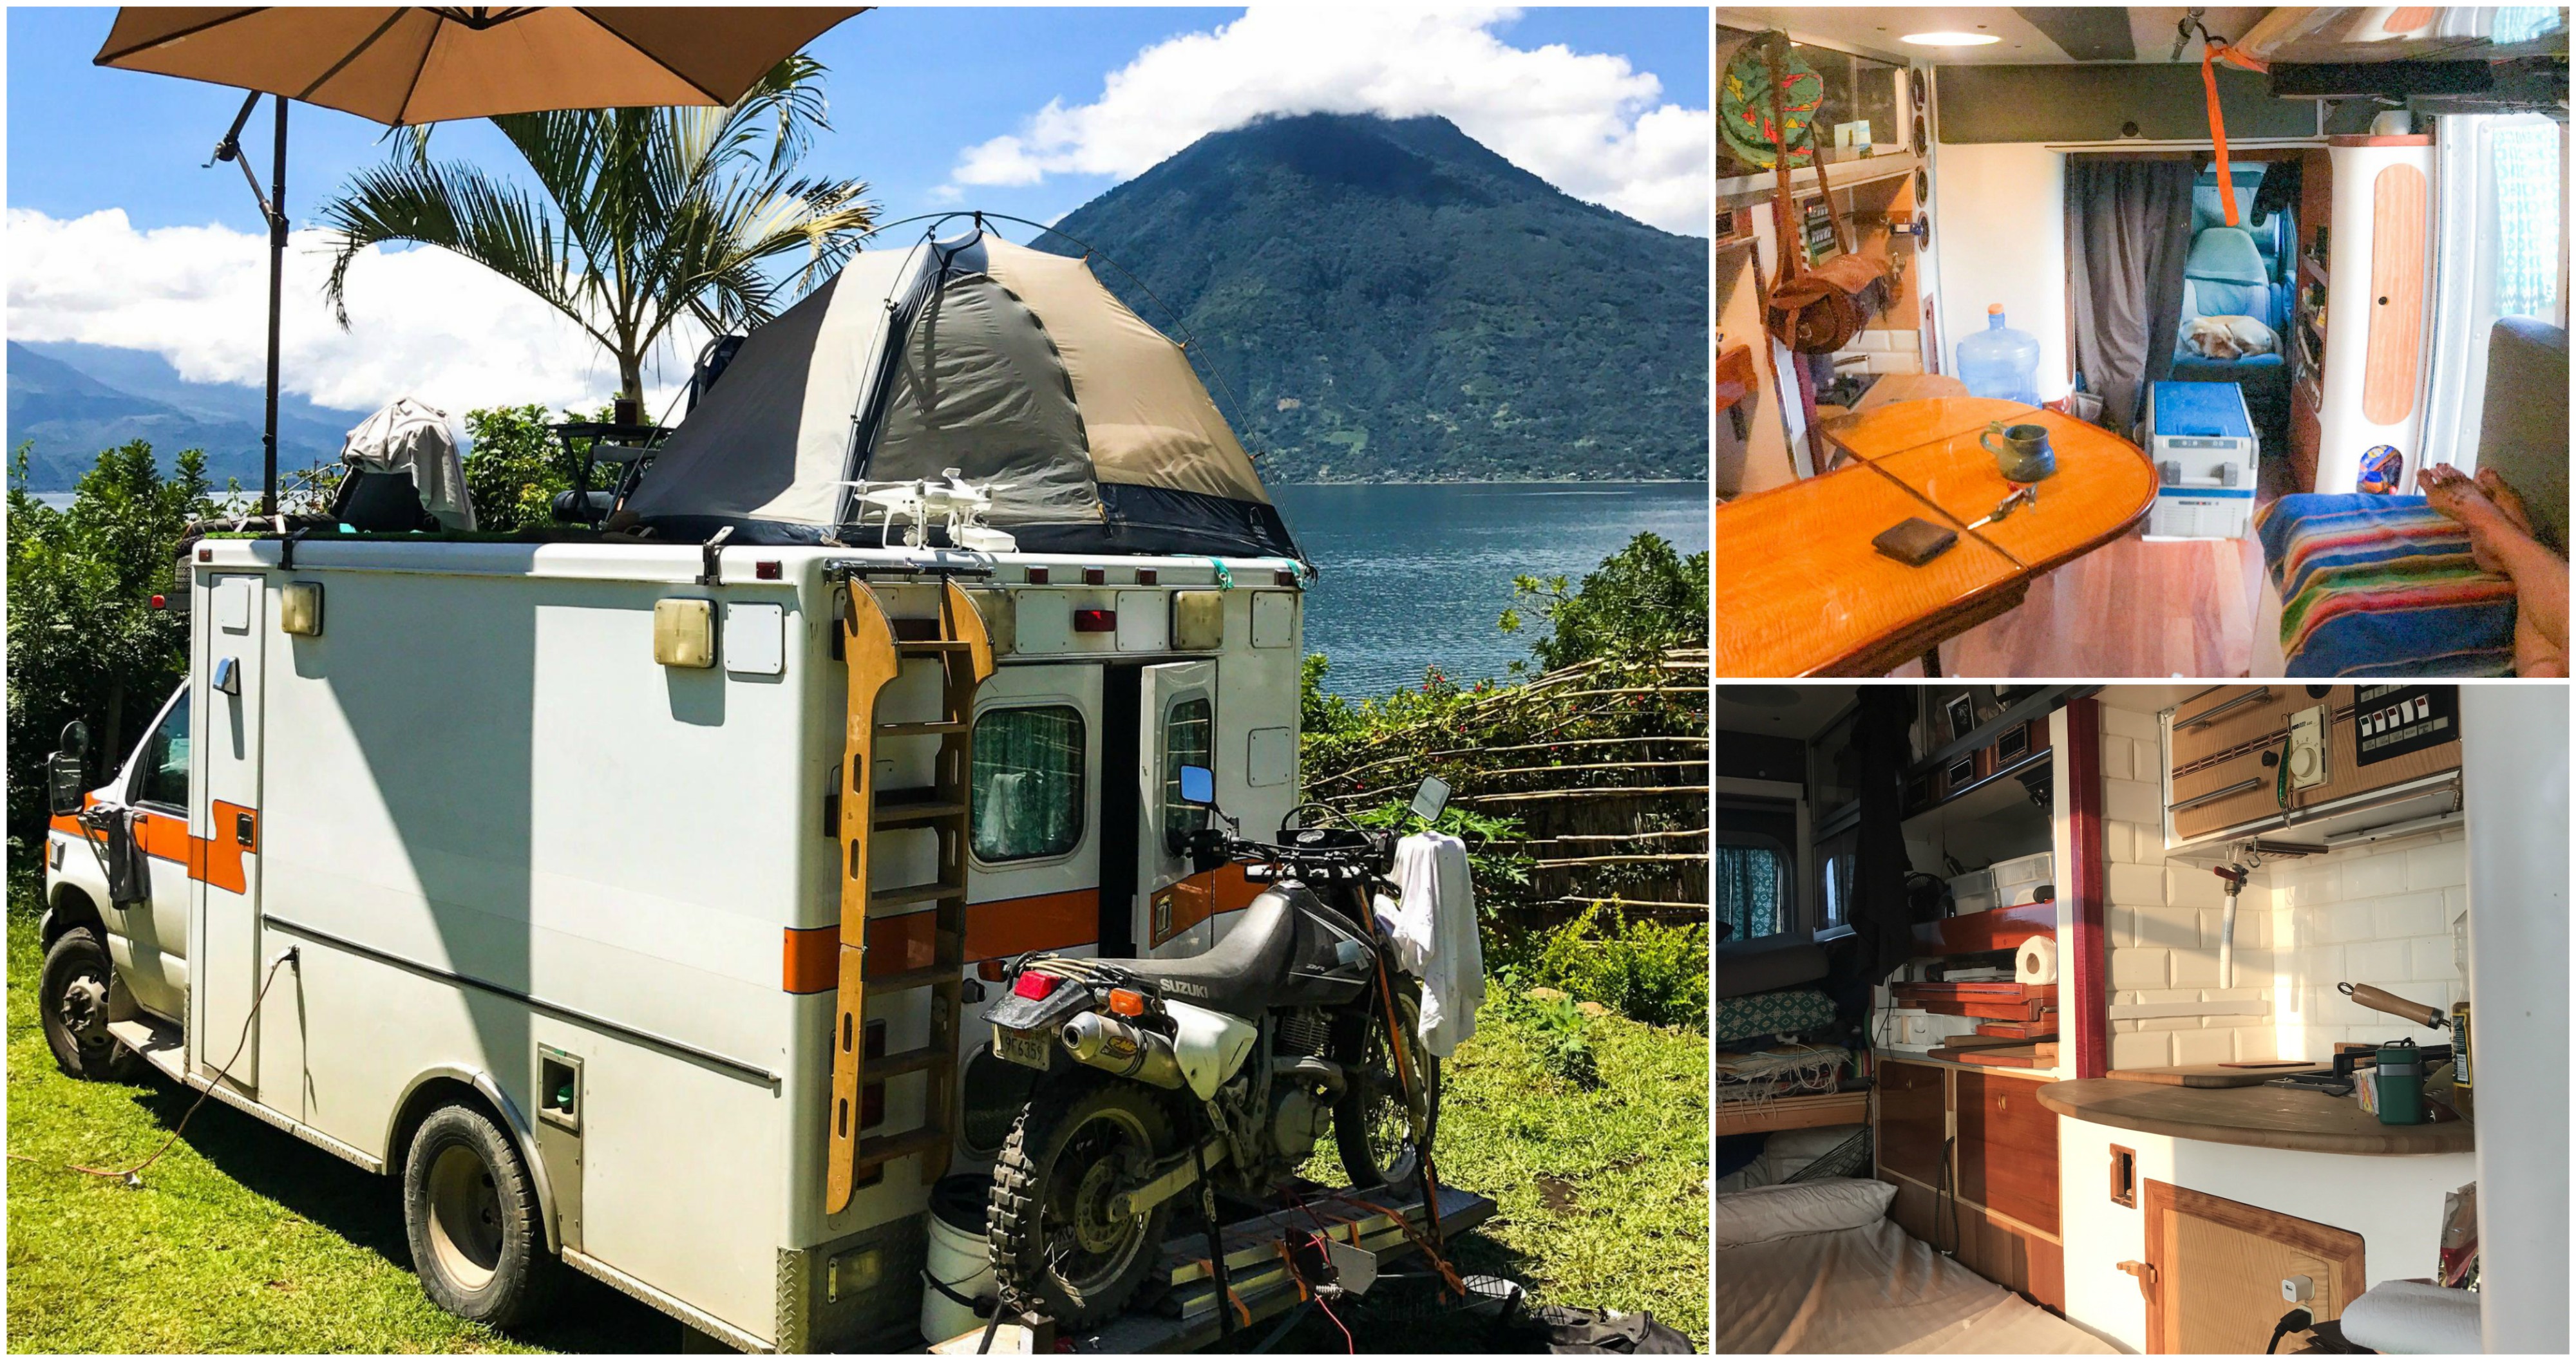 He Bought a Used Ambulance, Turned it into his Home, and Drove South to the Tropics